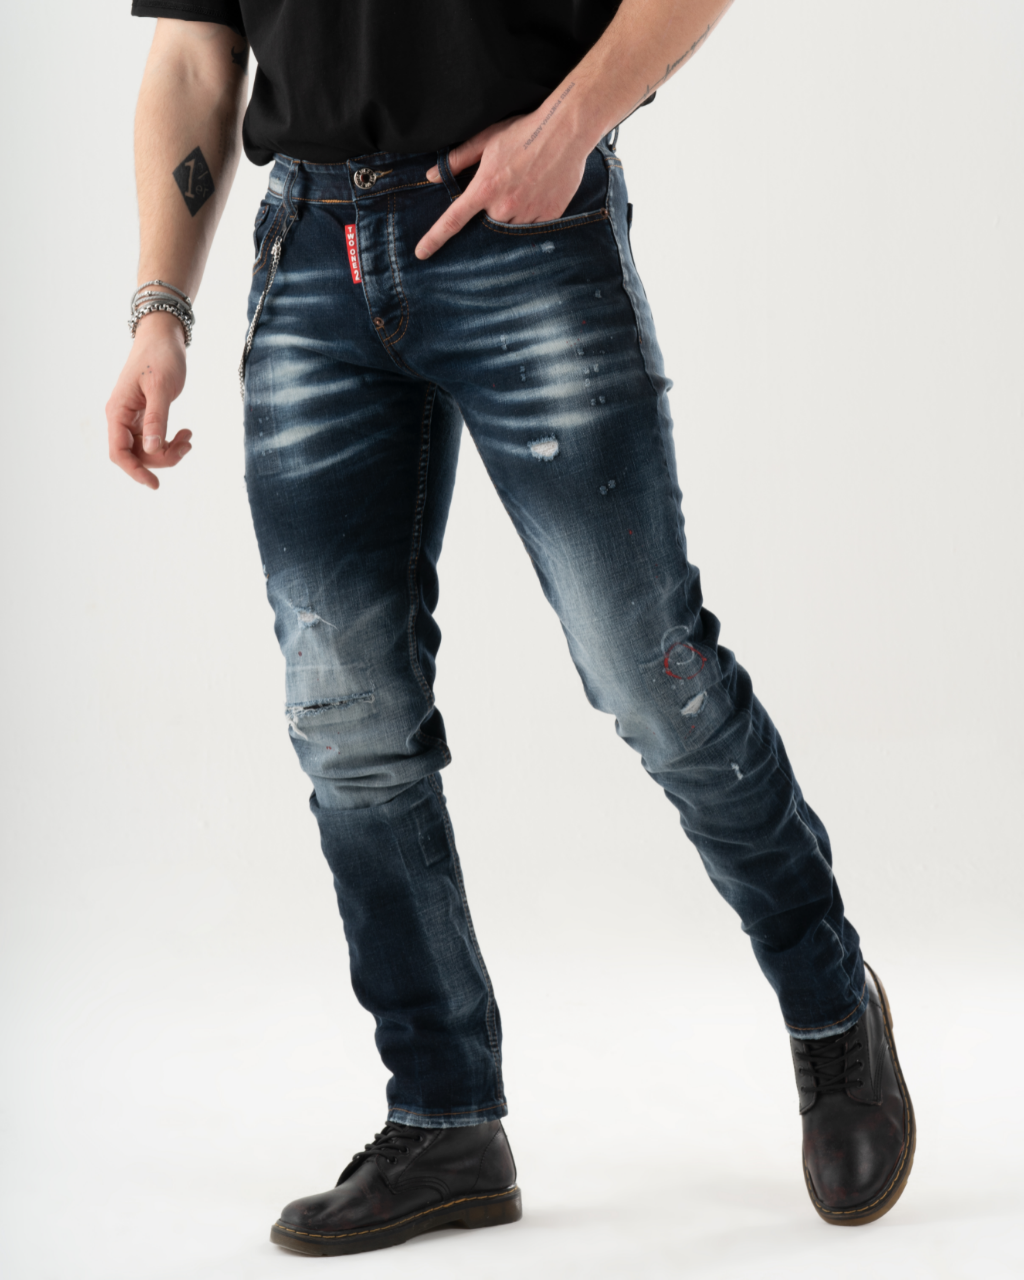 A man is standing in a studio wearing LIGHTNING skinny fit blue jeans.